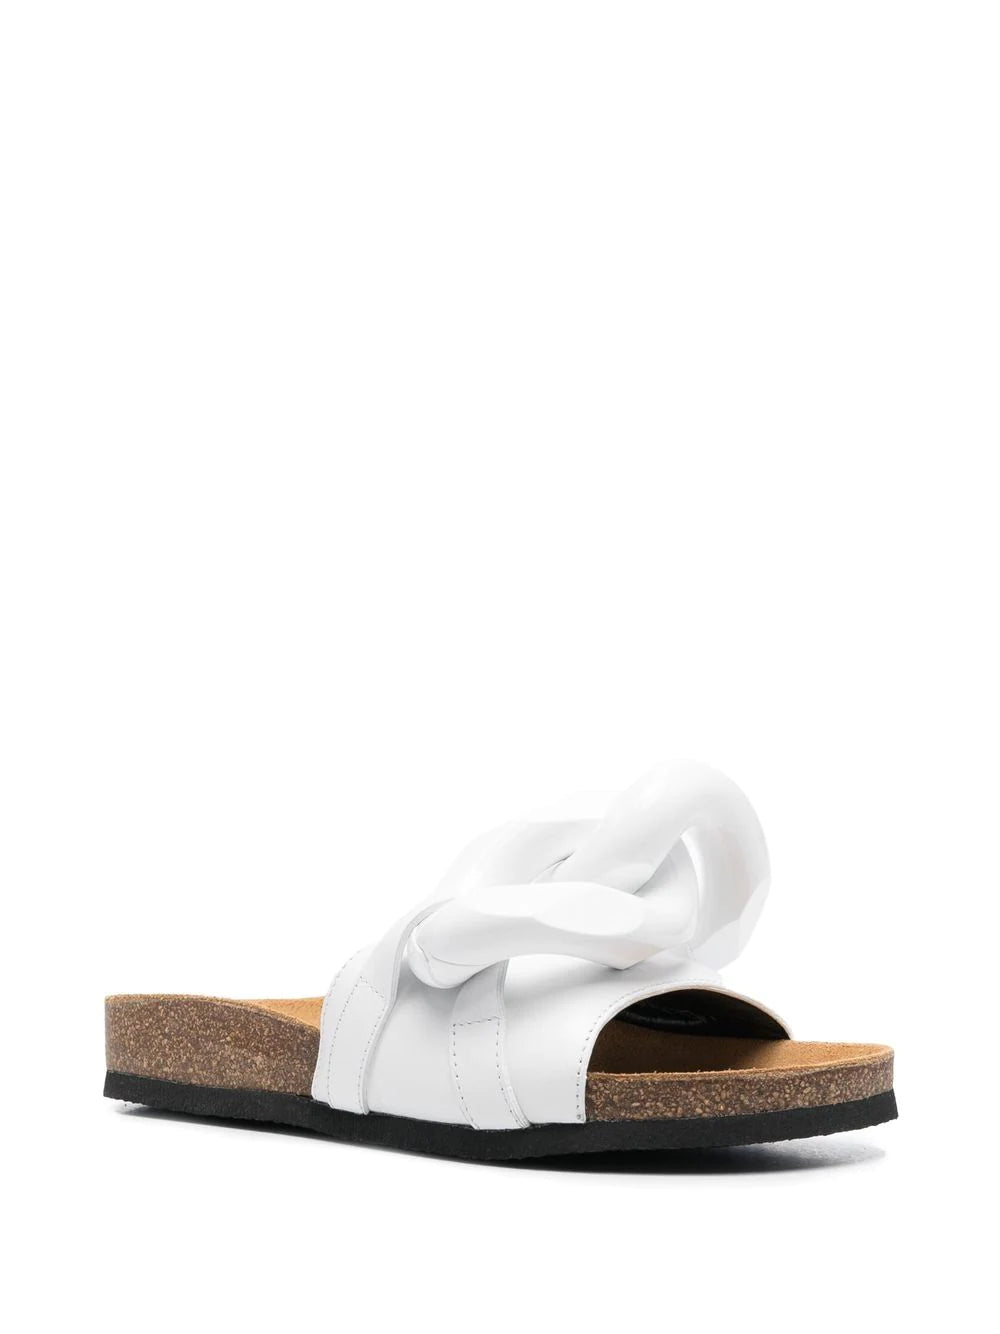 JW Anderson chain-link leather slides